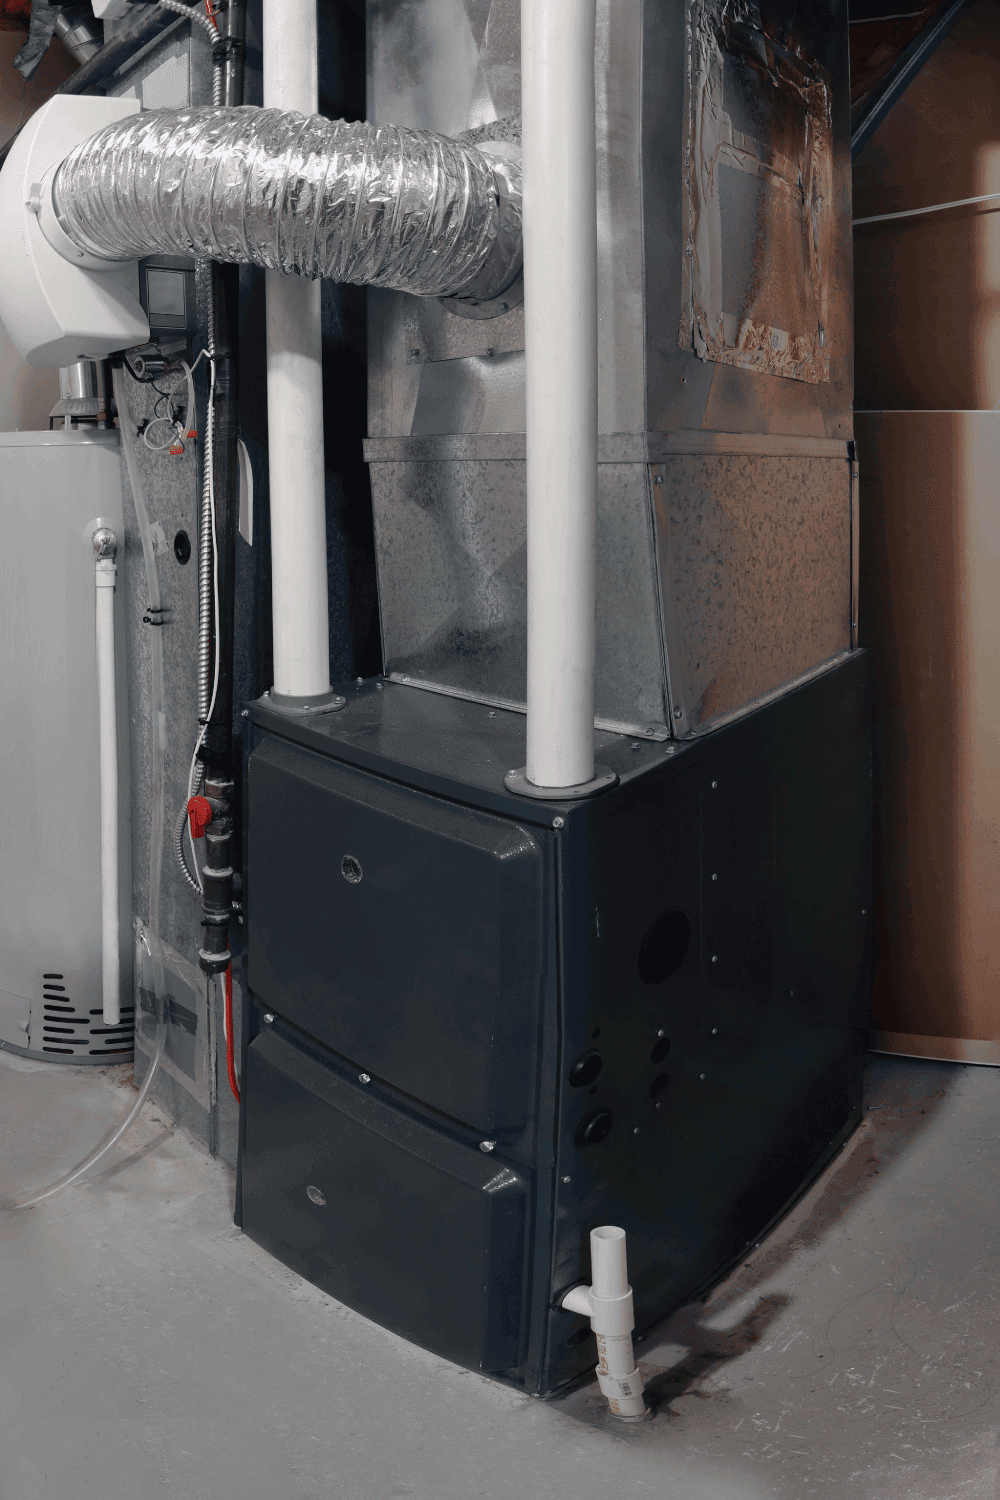 high efficiency furnace with a residential gas water heater 